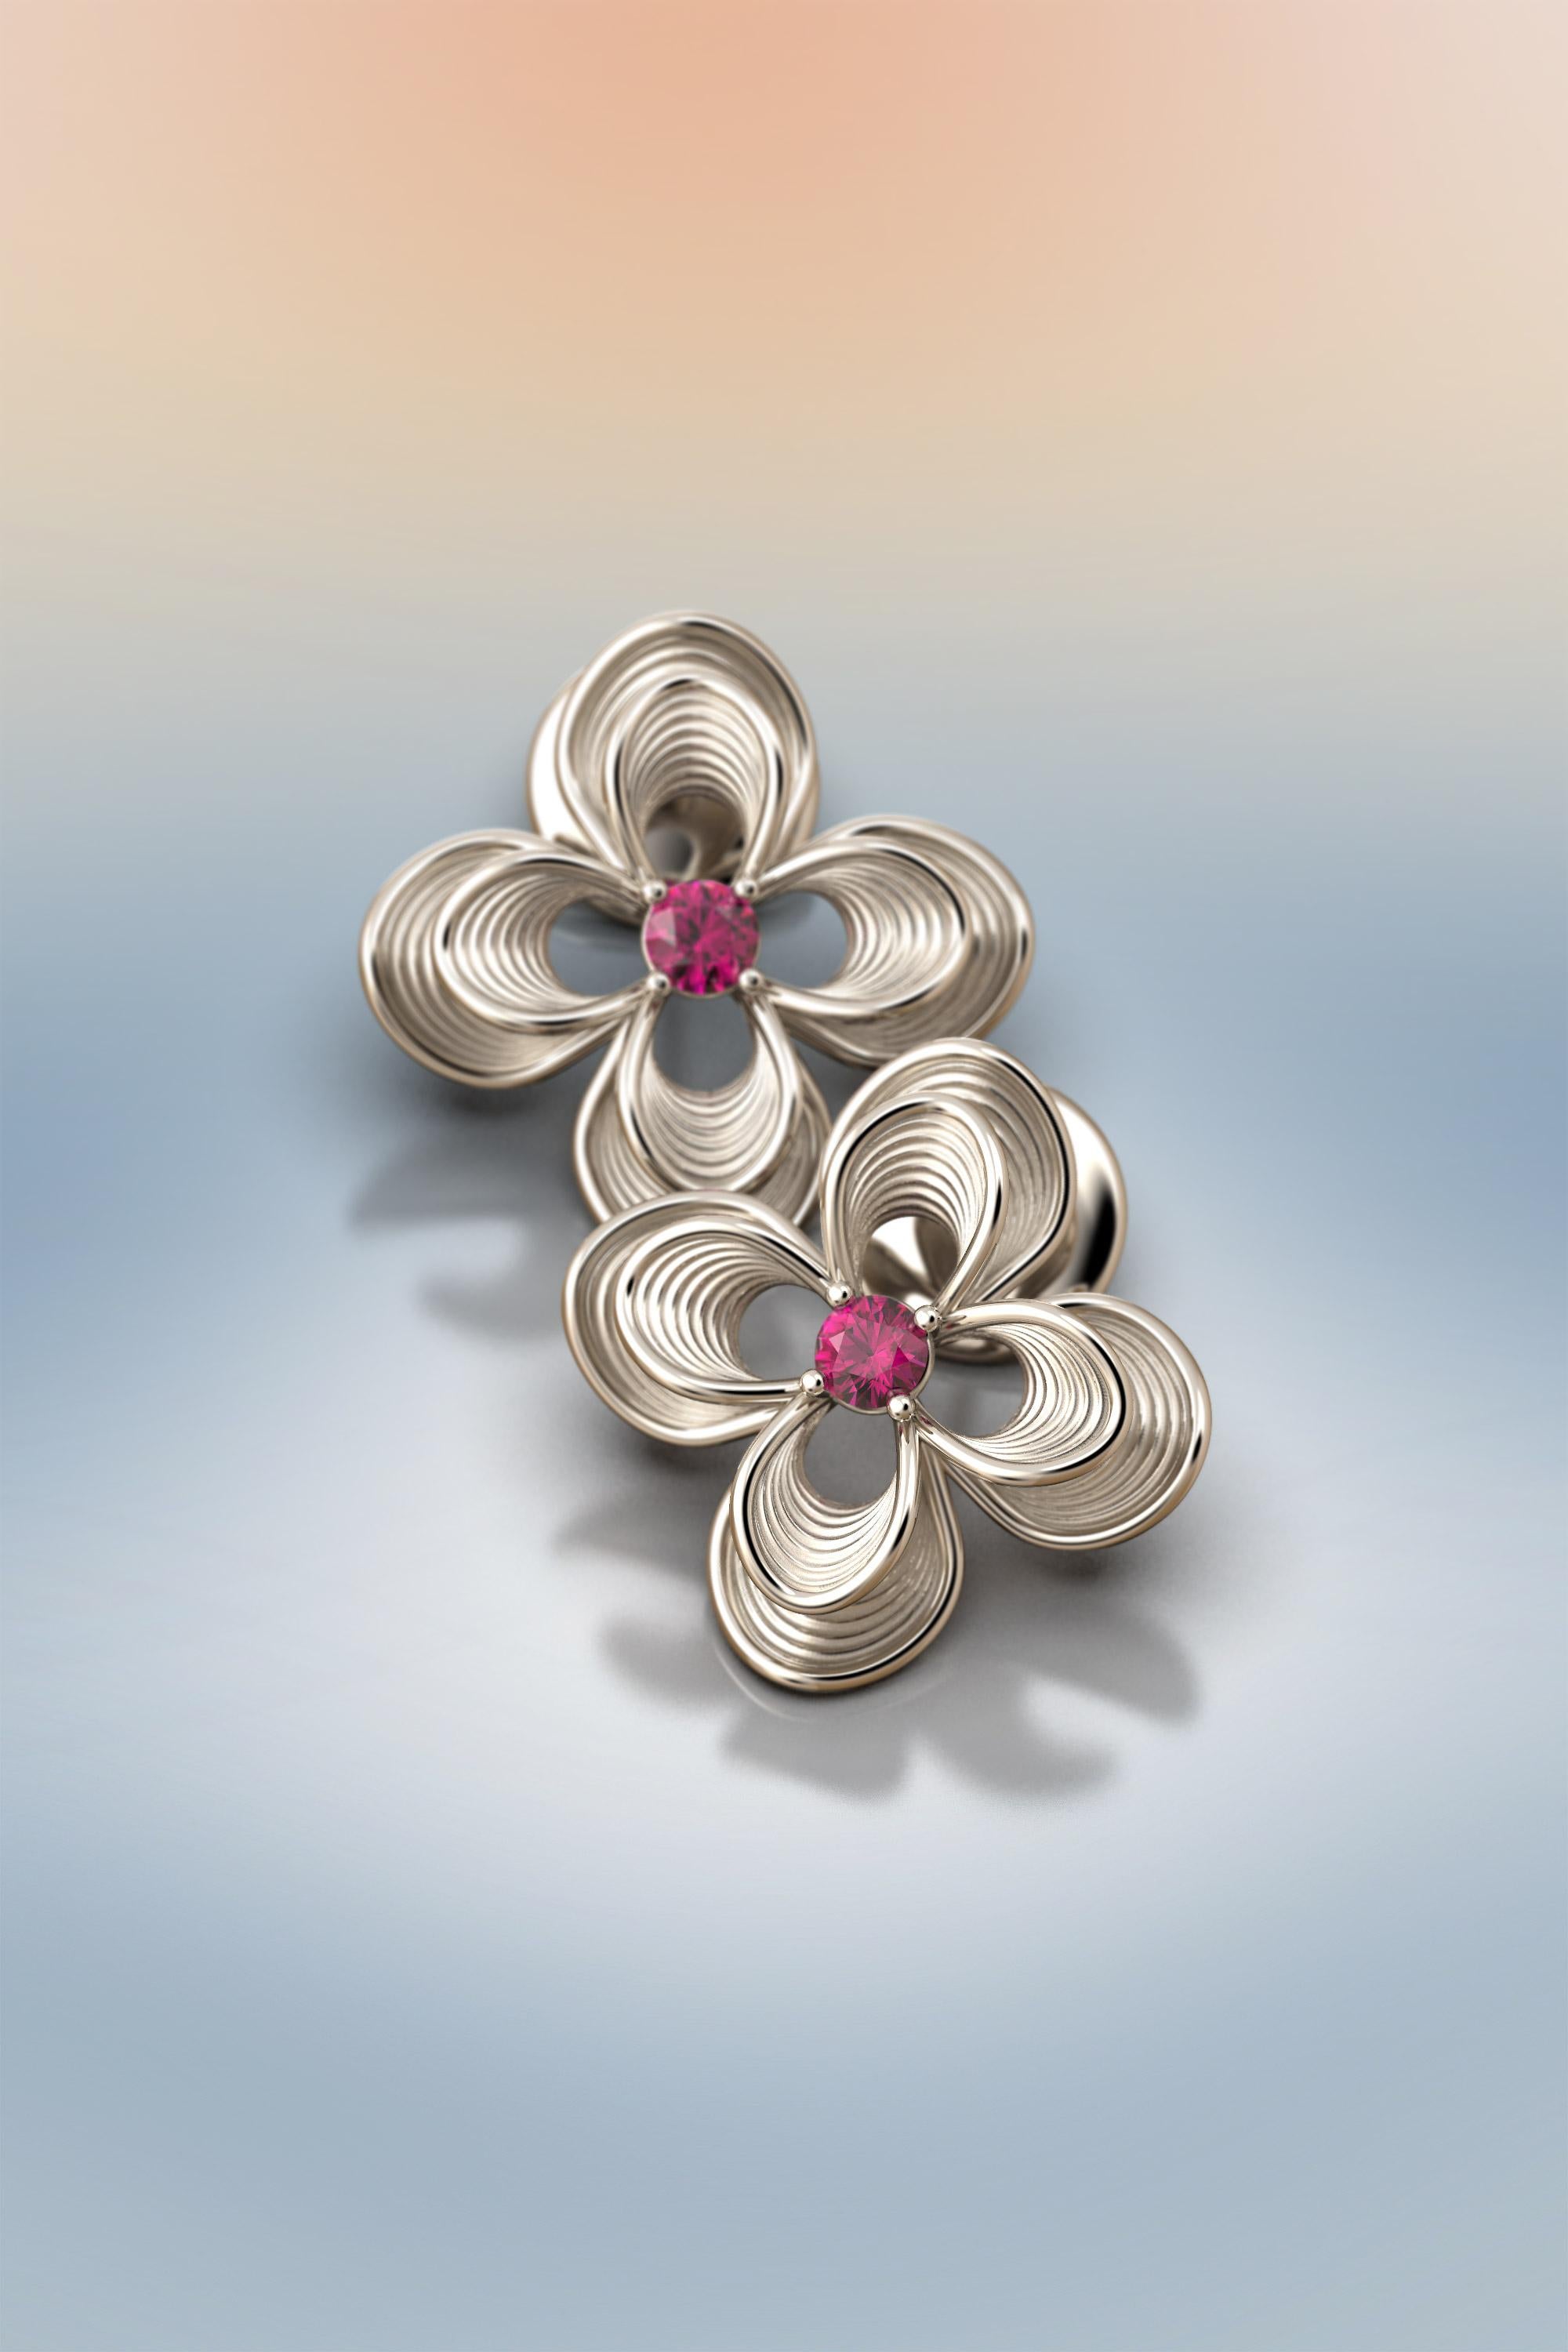 Introducing our exquisite Modern Four Leaf Clover Stud Earrings, a symbol of luck and charm, meticulously crafted in the heart of Italy using the finest materials. These elegant earrings are designed to captivate and inspire, featuring a radiant